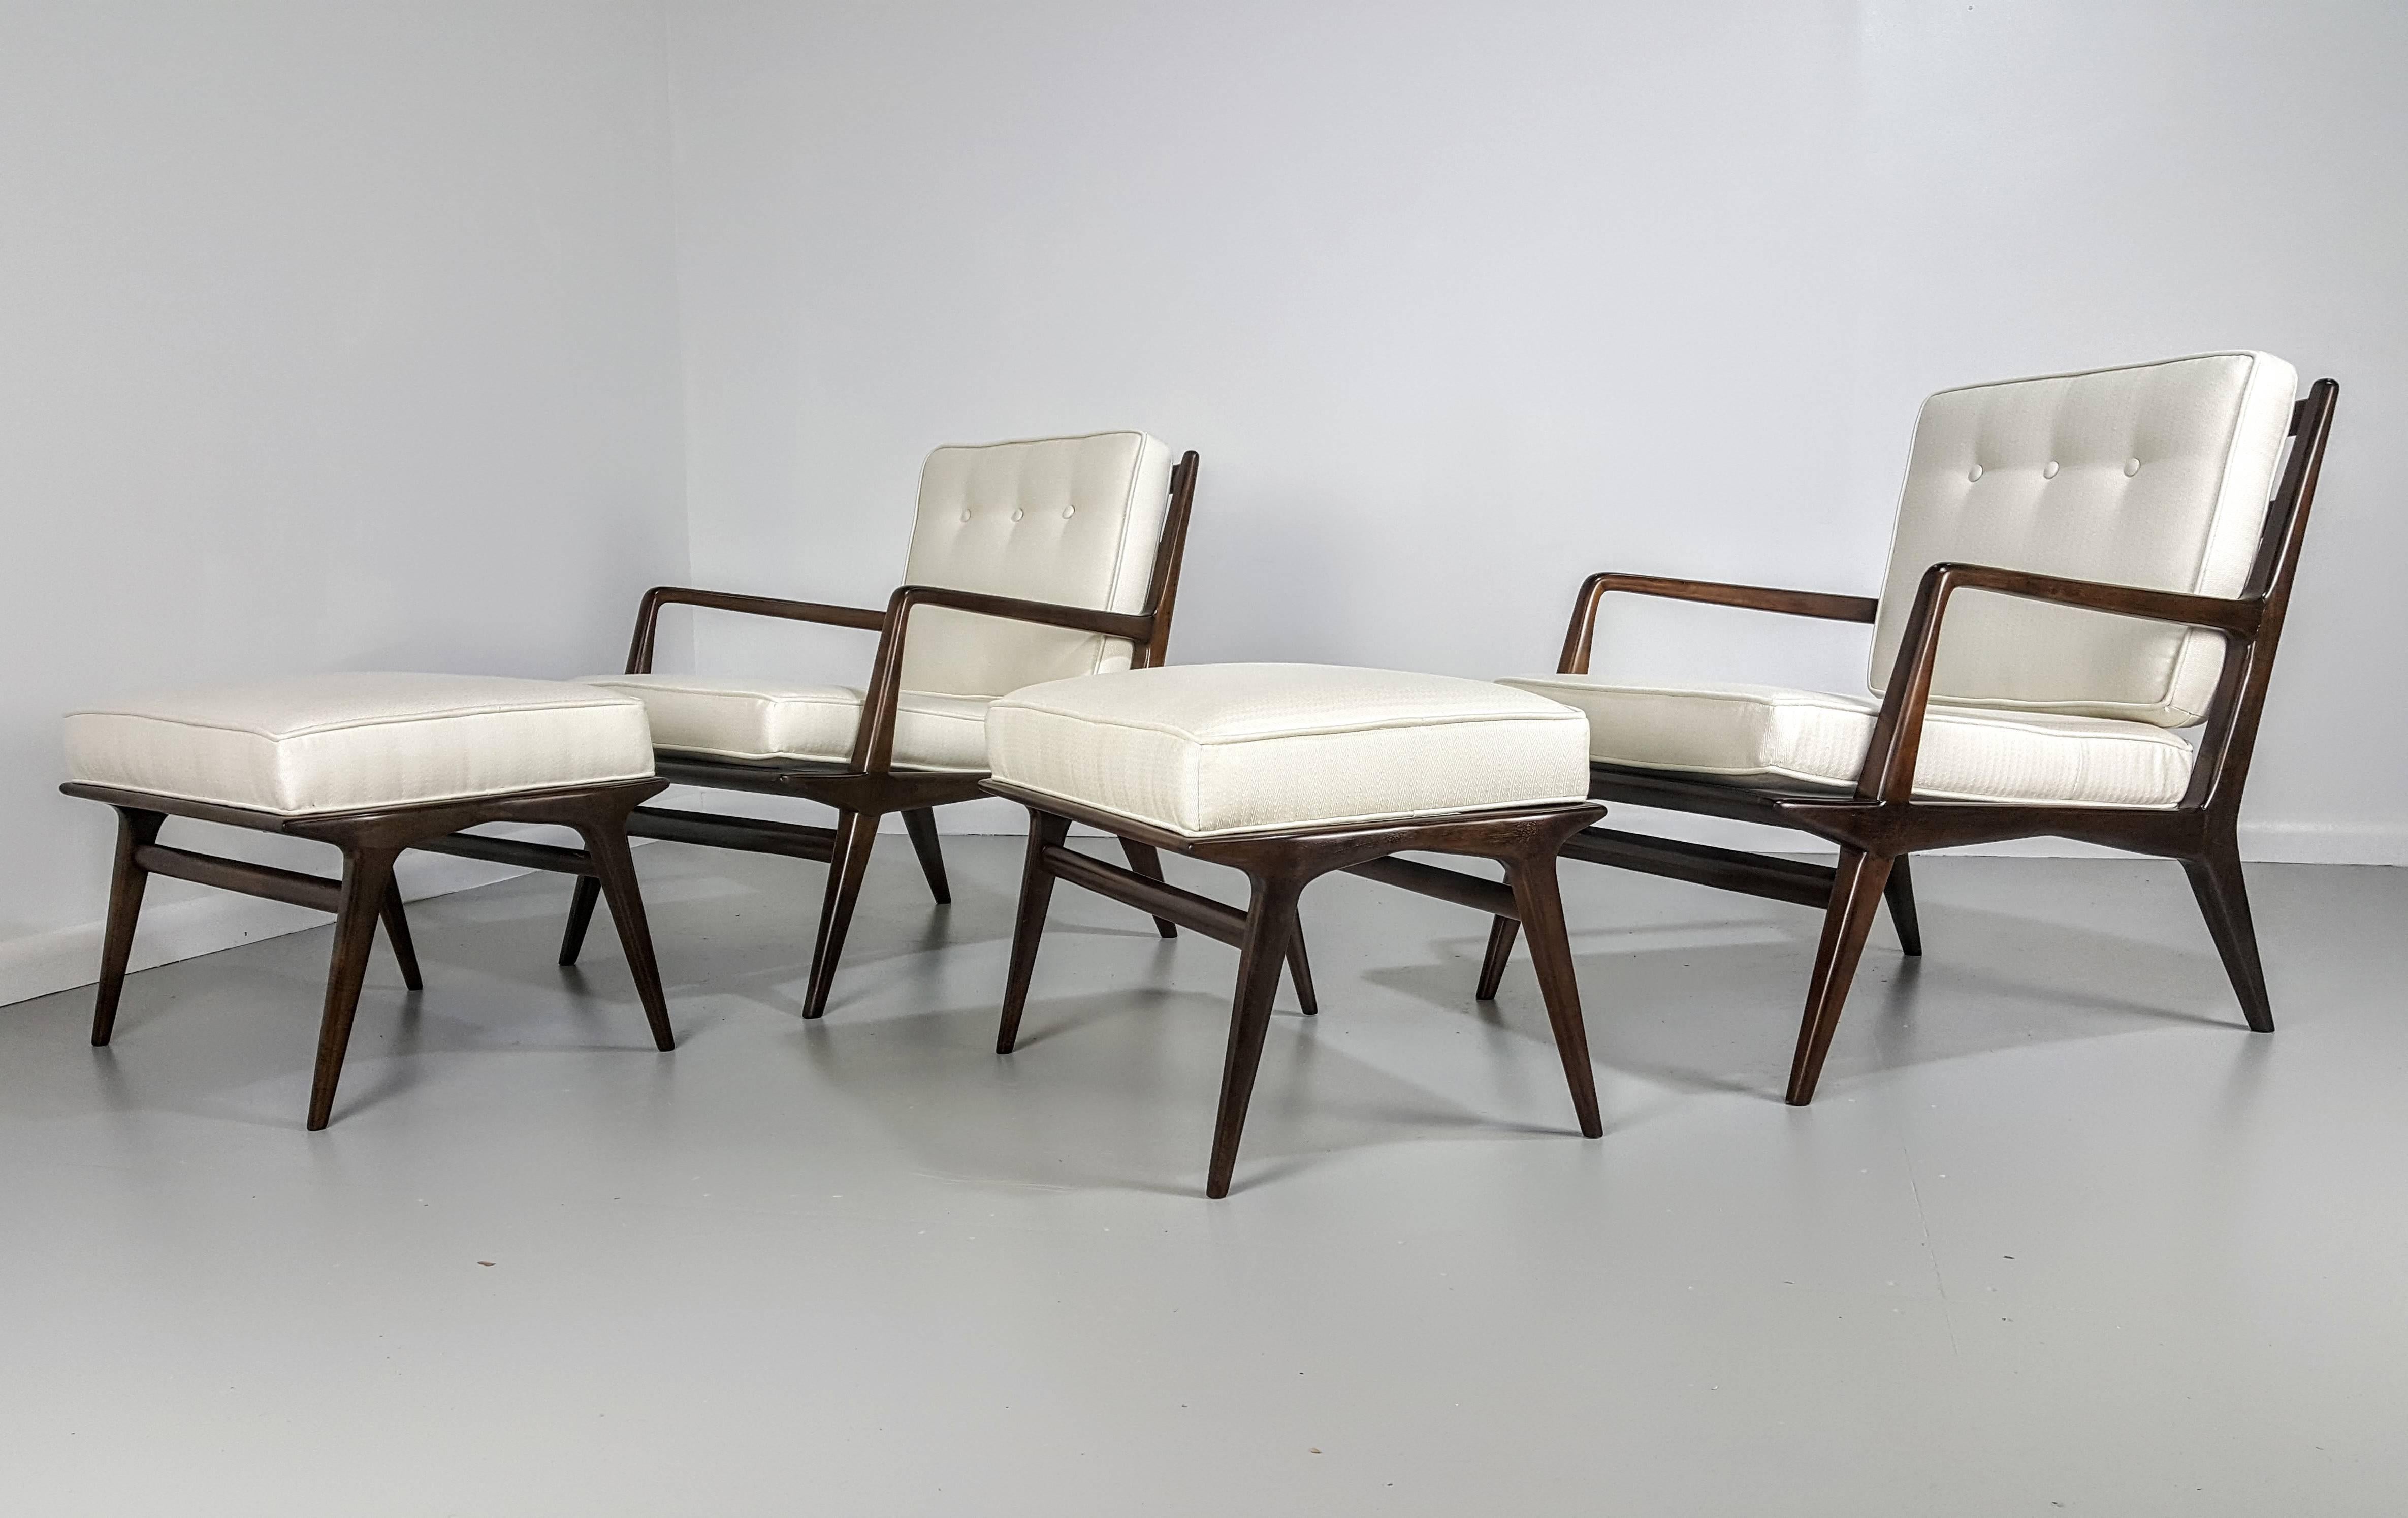 Pair of Carlo di Carli lounge chairs with Ottomans for Singer and Sons, Italy, 1950s. Fully restored and newly upholstered.

See this item in our private NYC showroom! Refine Limited is located in the heart of Chelsea at the history